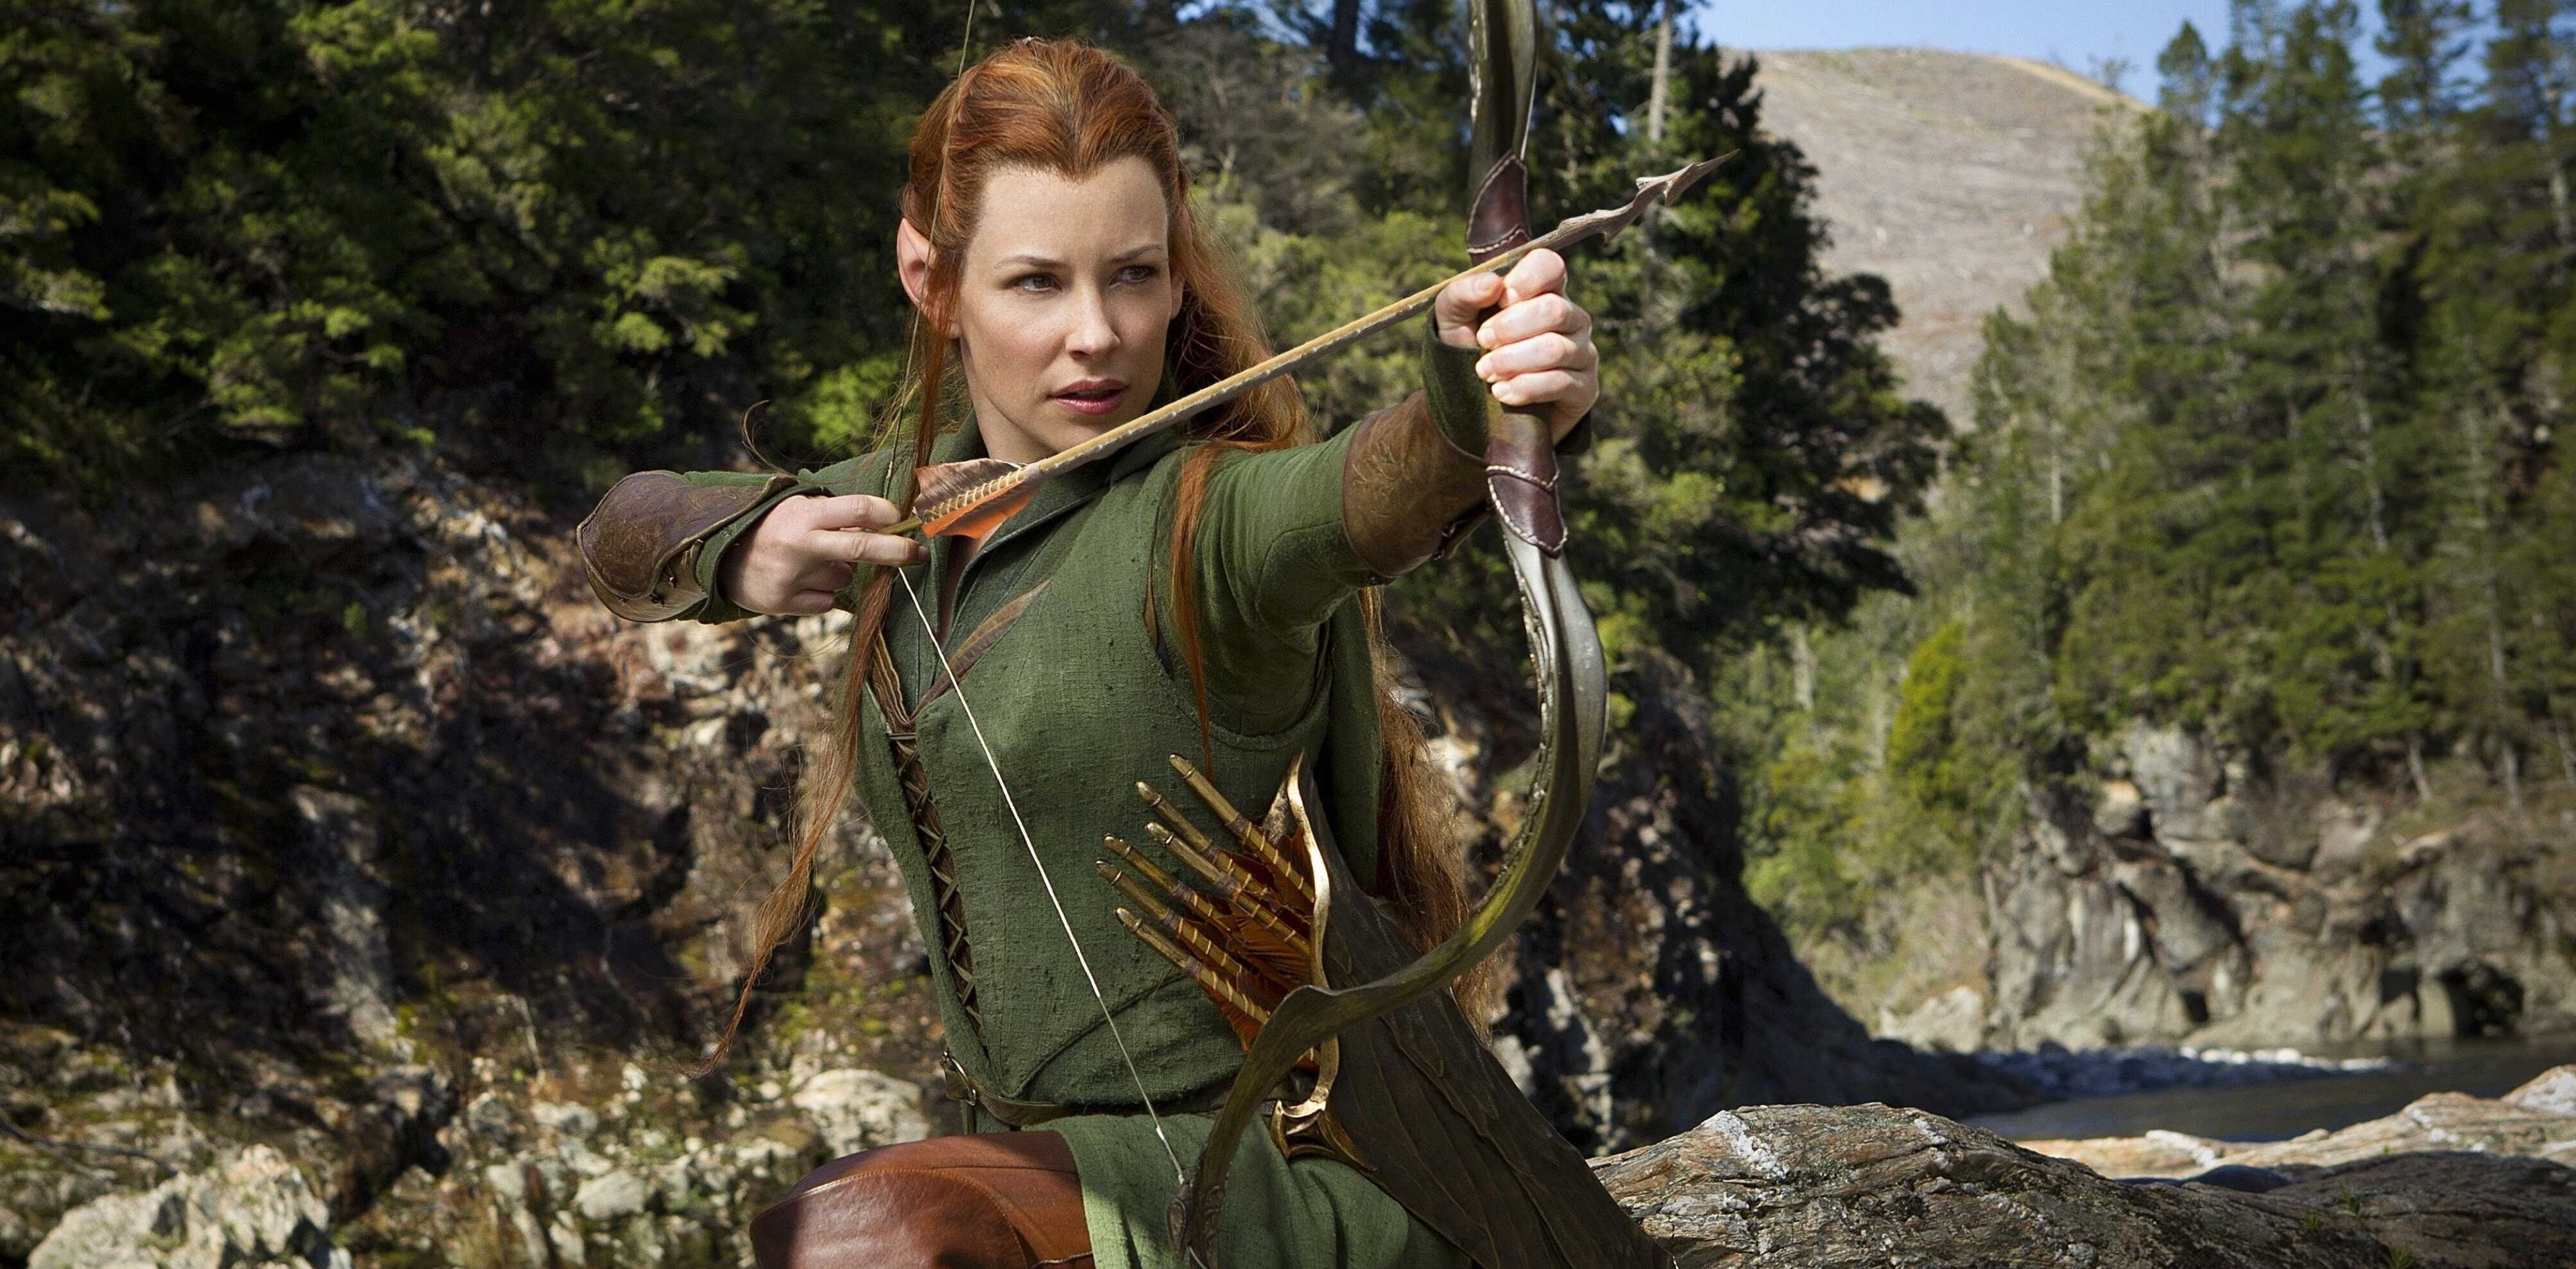 3840x1891 evangeline lilly 4k wallpaper most downloaded | Hobbit desolation of smaug, Desolation of smaug, Tauriel